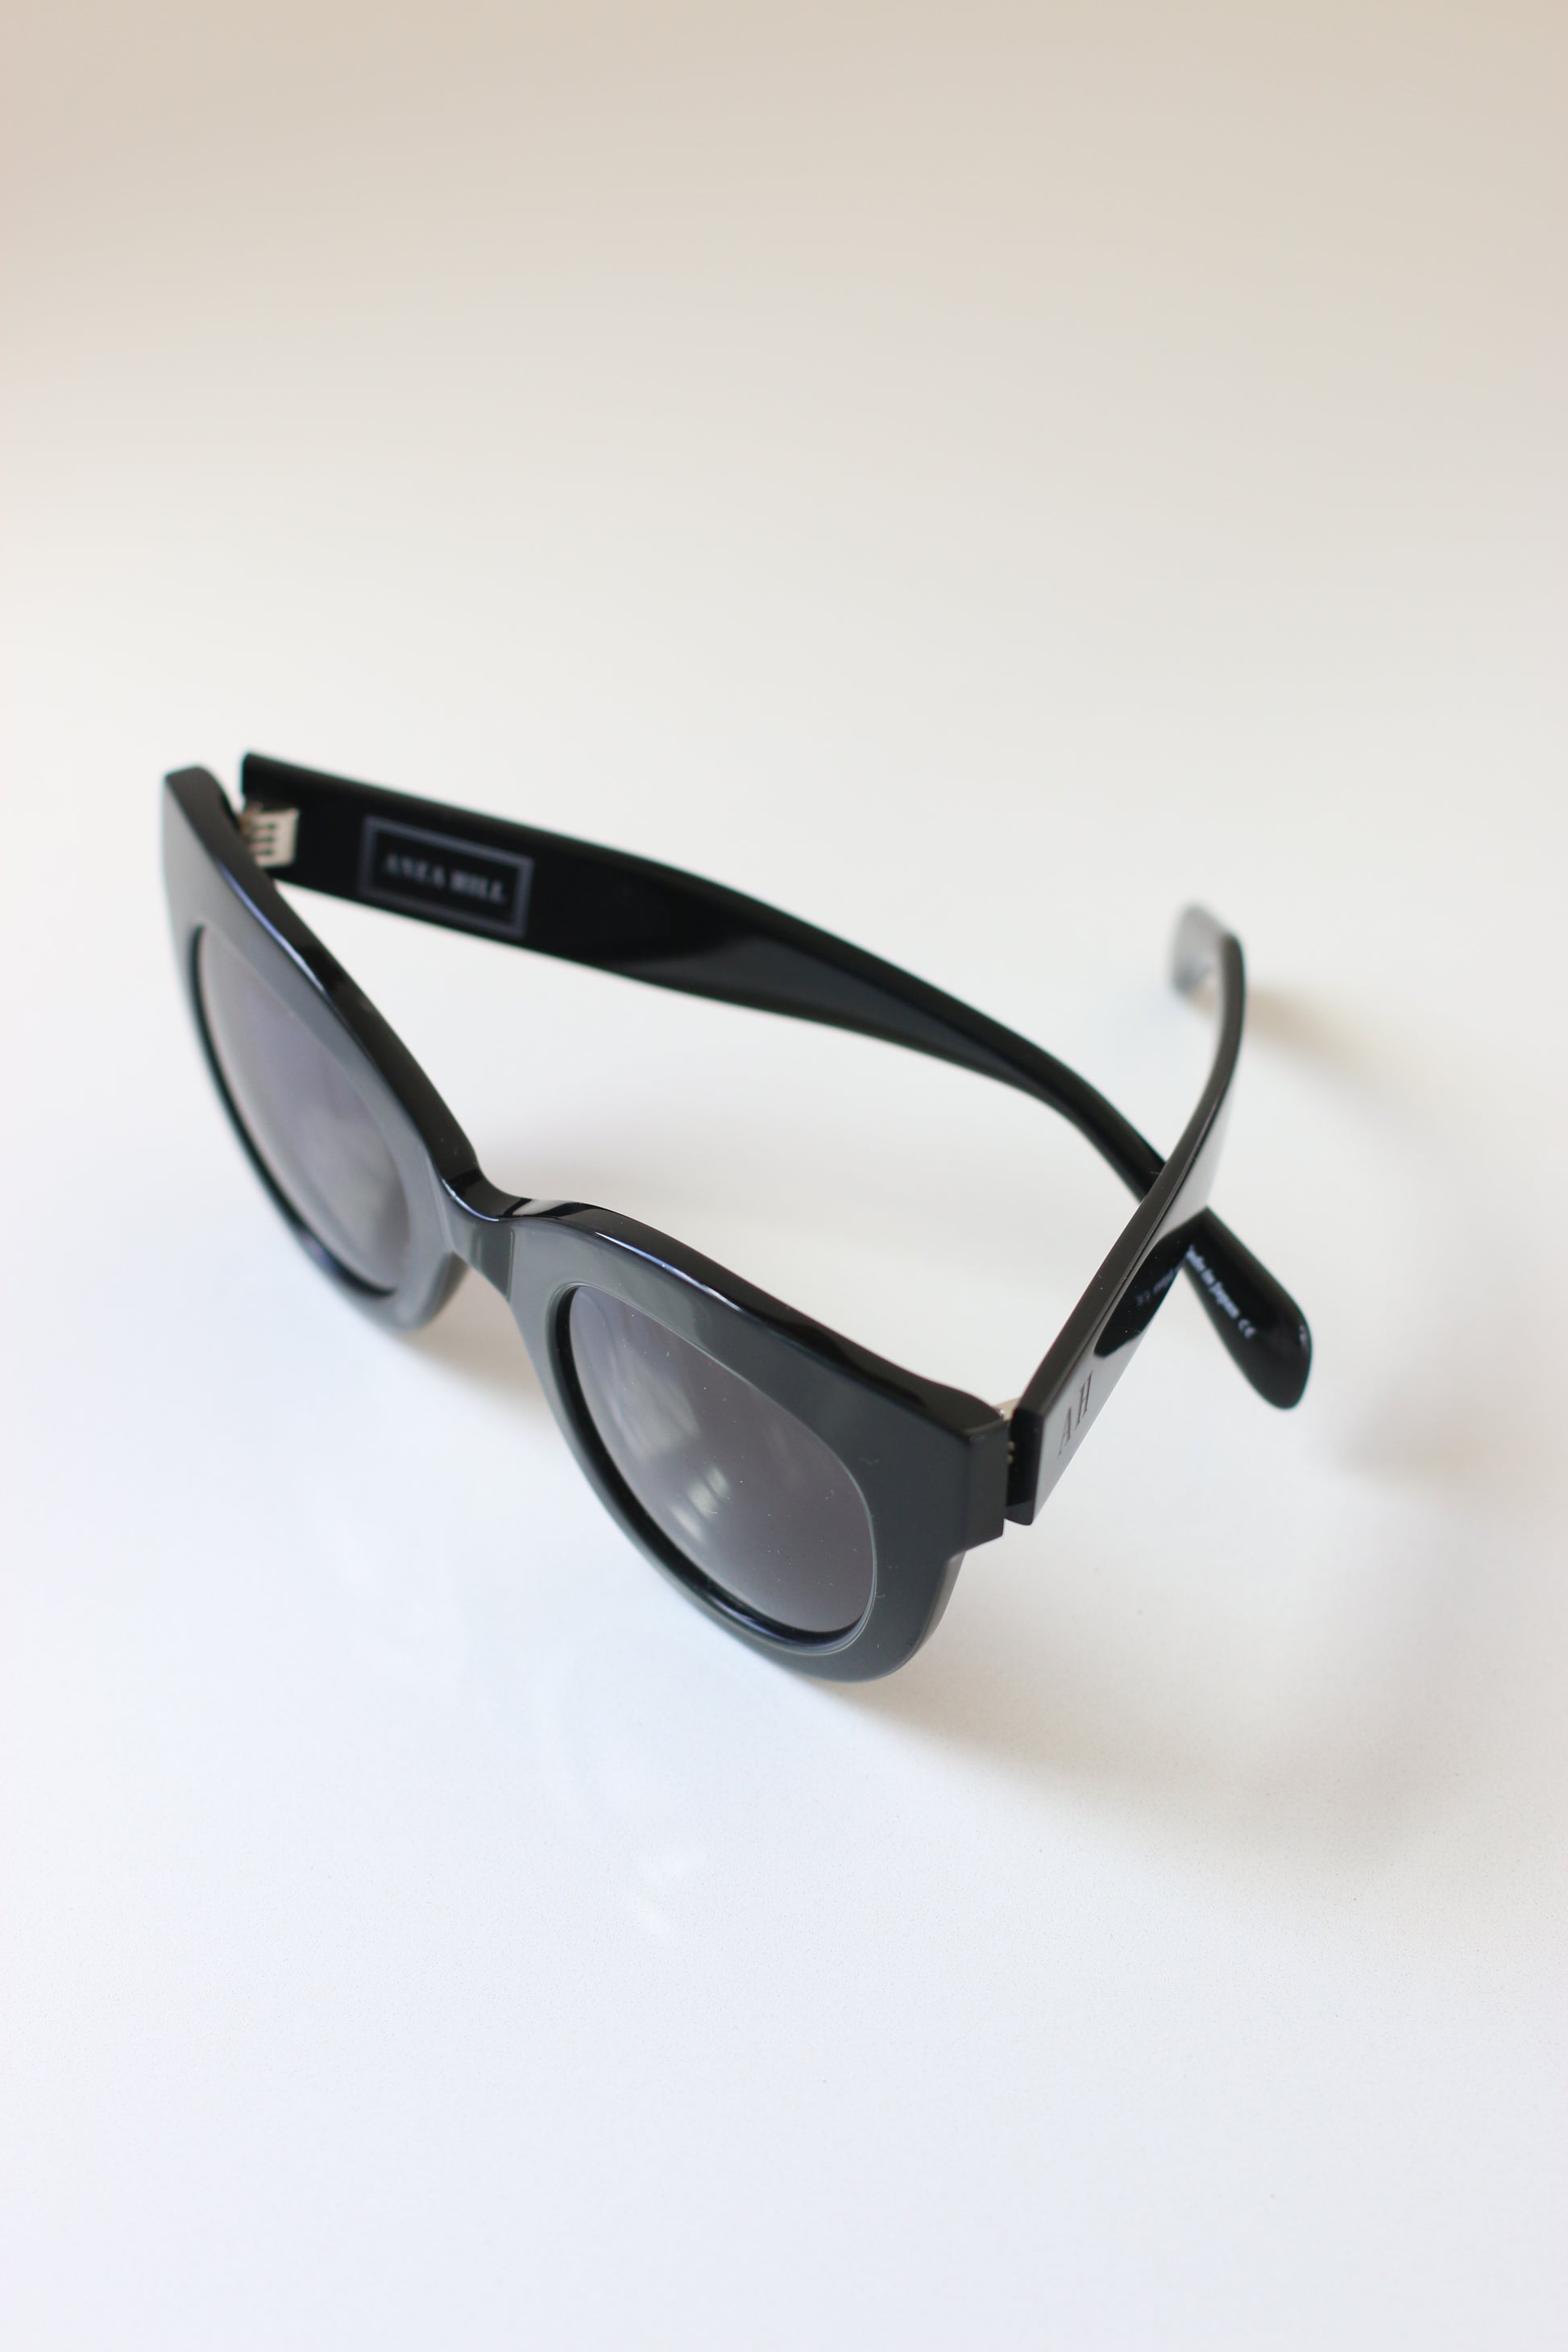 Top view sunglasses with adjustable acetate ear arms, exclusively designed with high-quality materials.